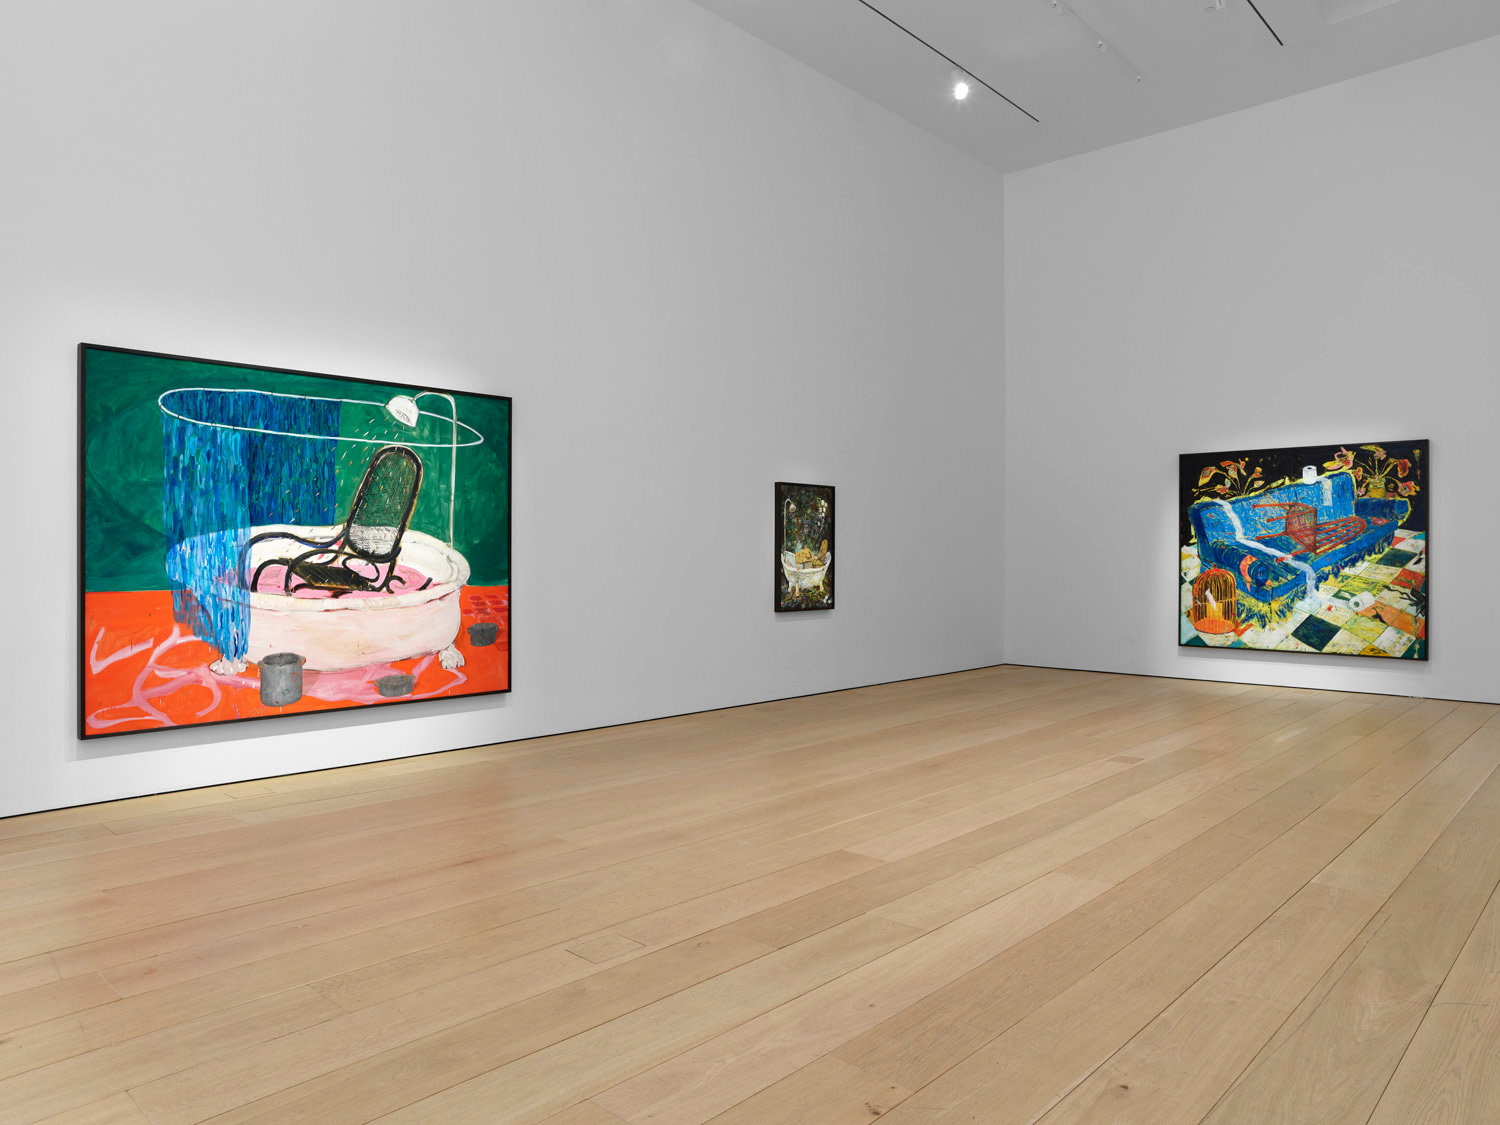 Fifth installation view of the exhibition Angel Otero: The Fortune of Having Been There at Lehmann Maupin in New York